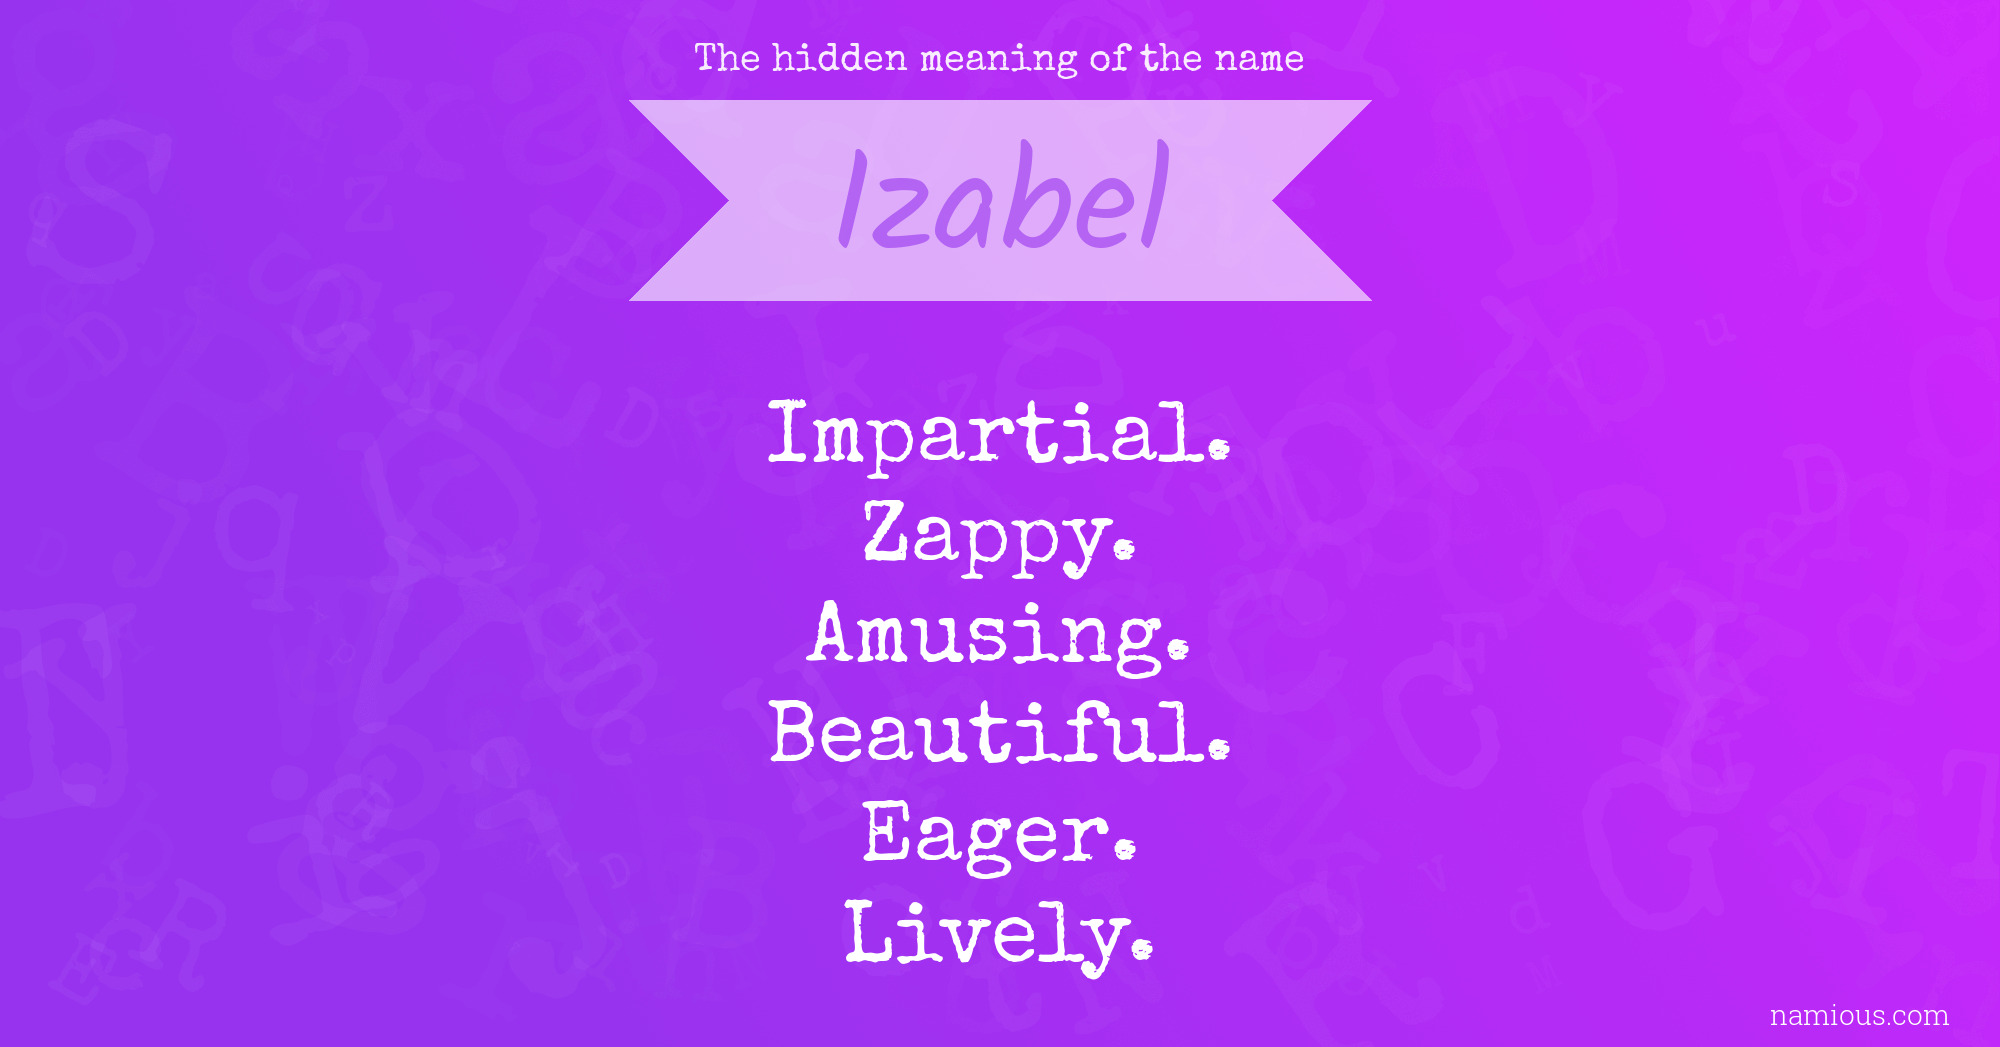 The hidden meaning of the name Izabel